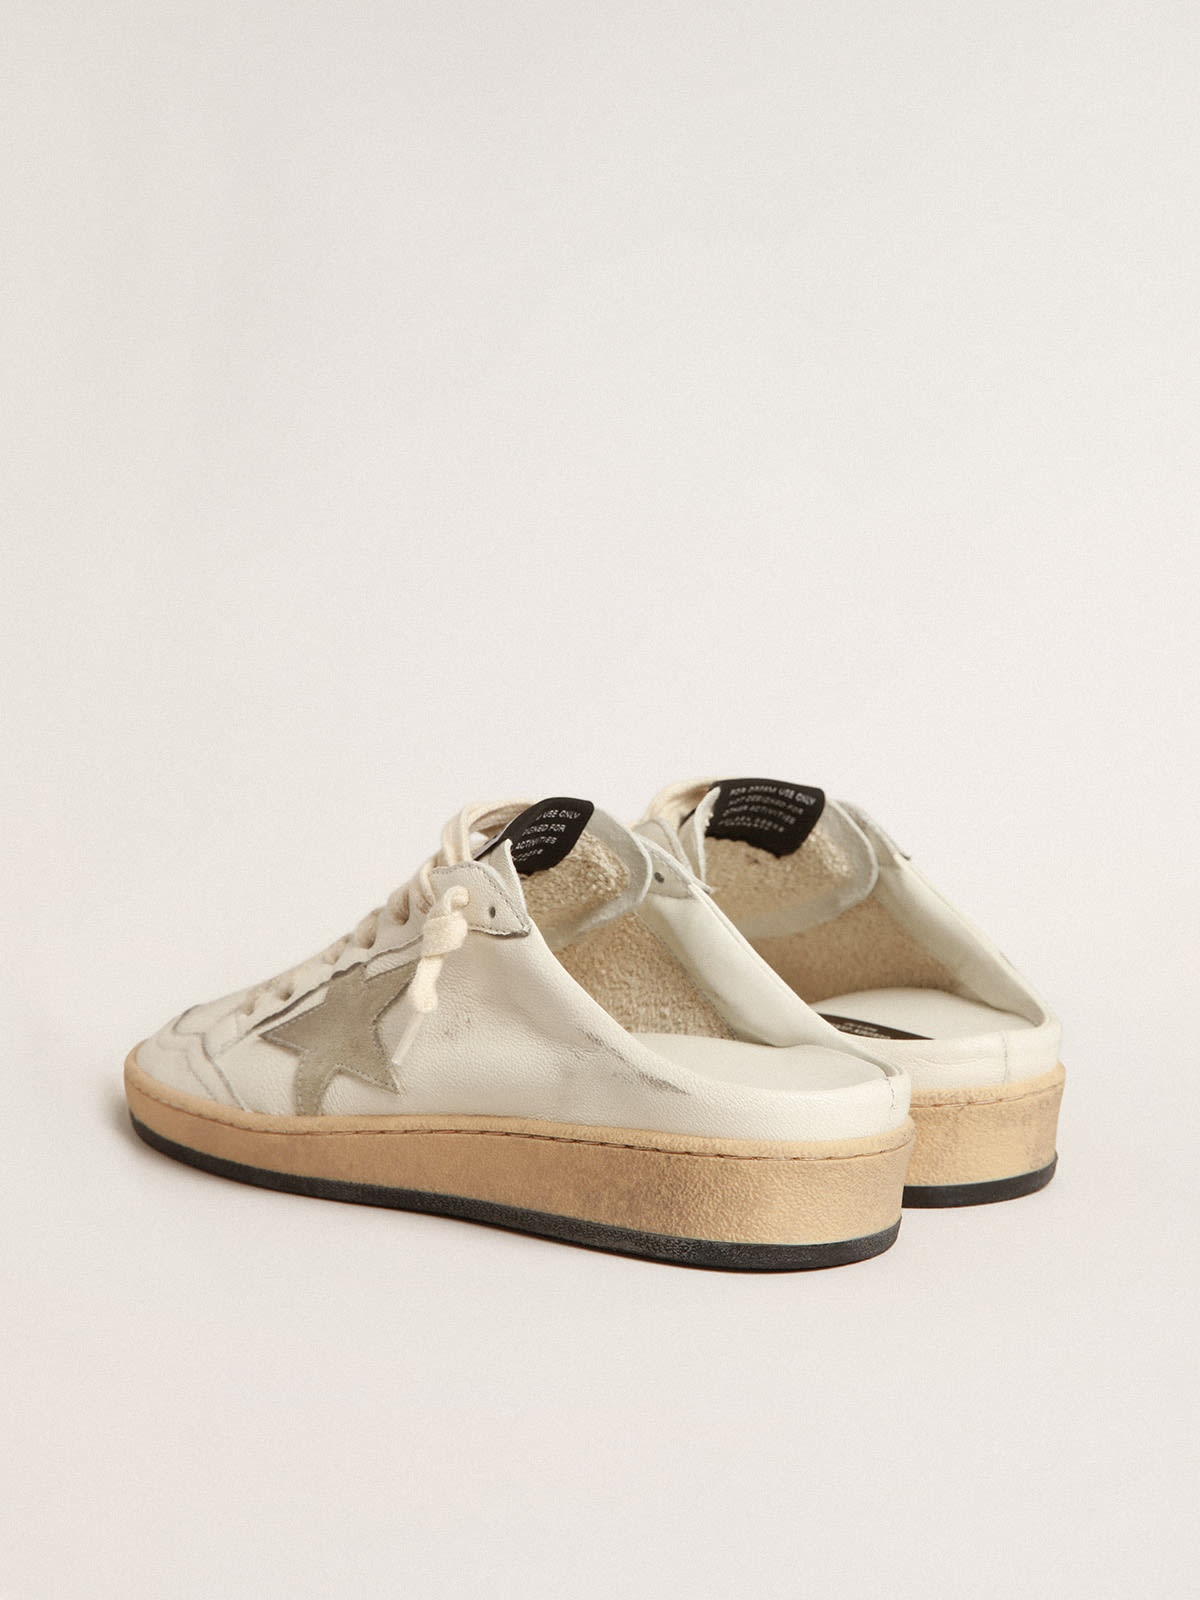 Ball Star Sabots in nappa leather with ice-gray suede star - 5